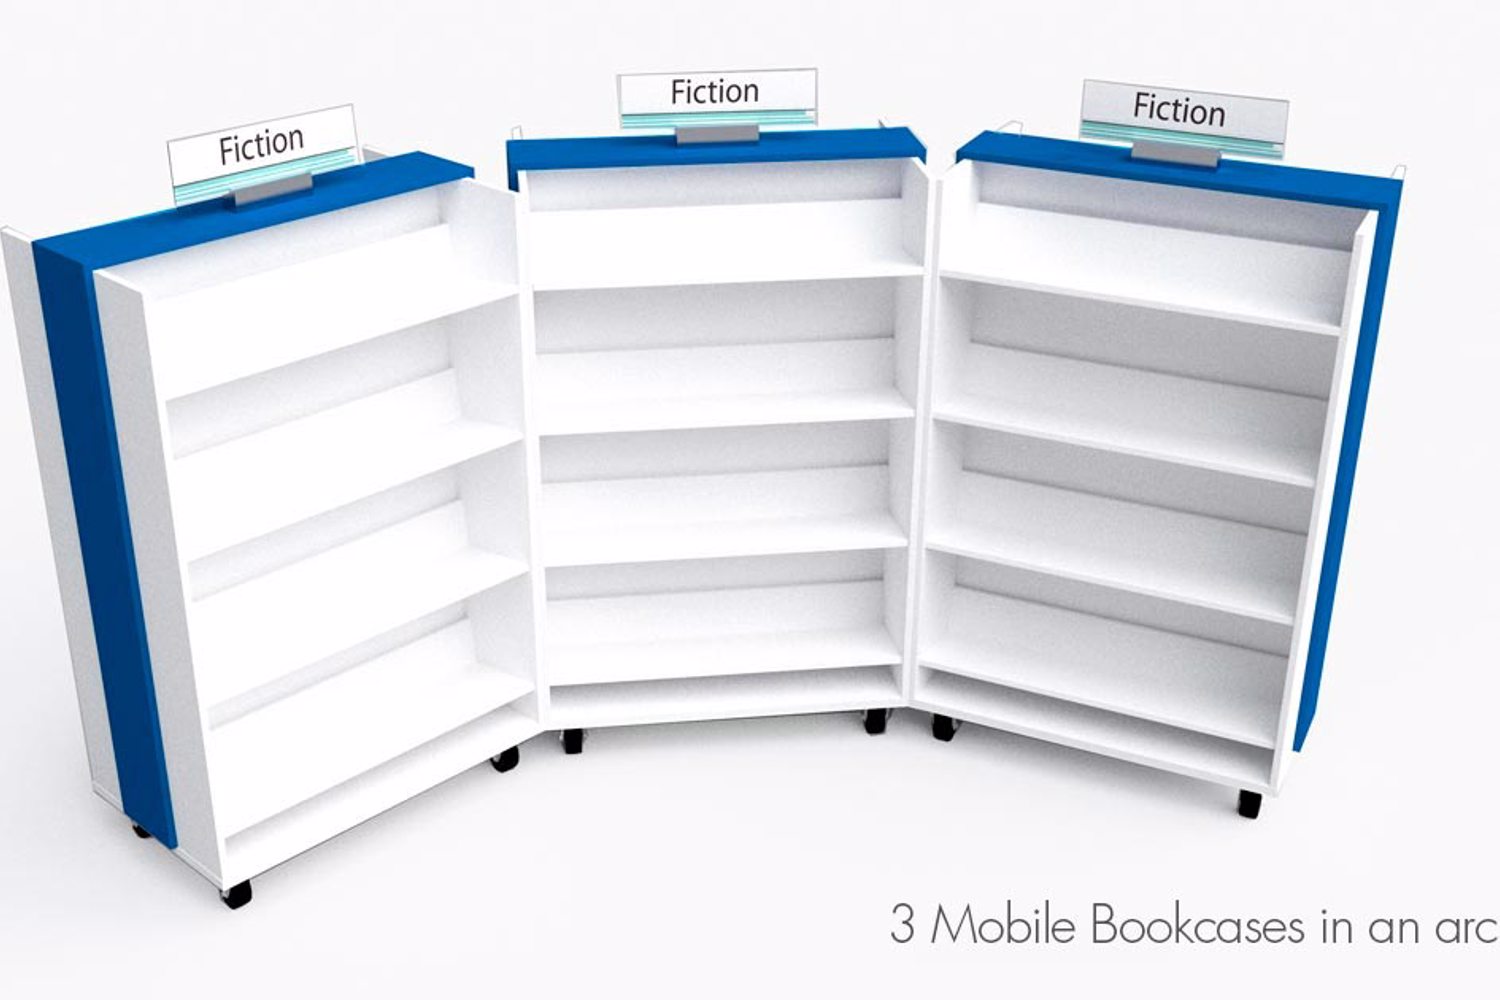 3 Mobile Bookcases in an arc